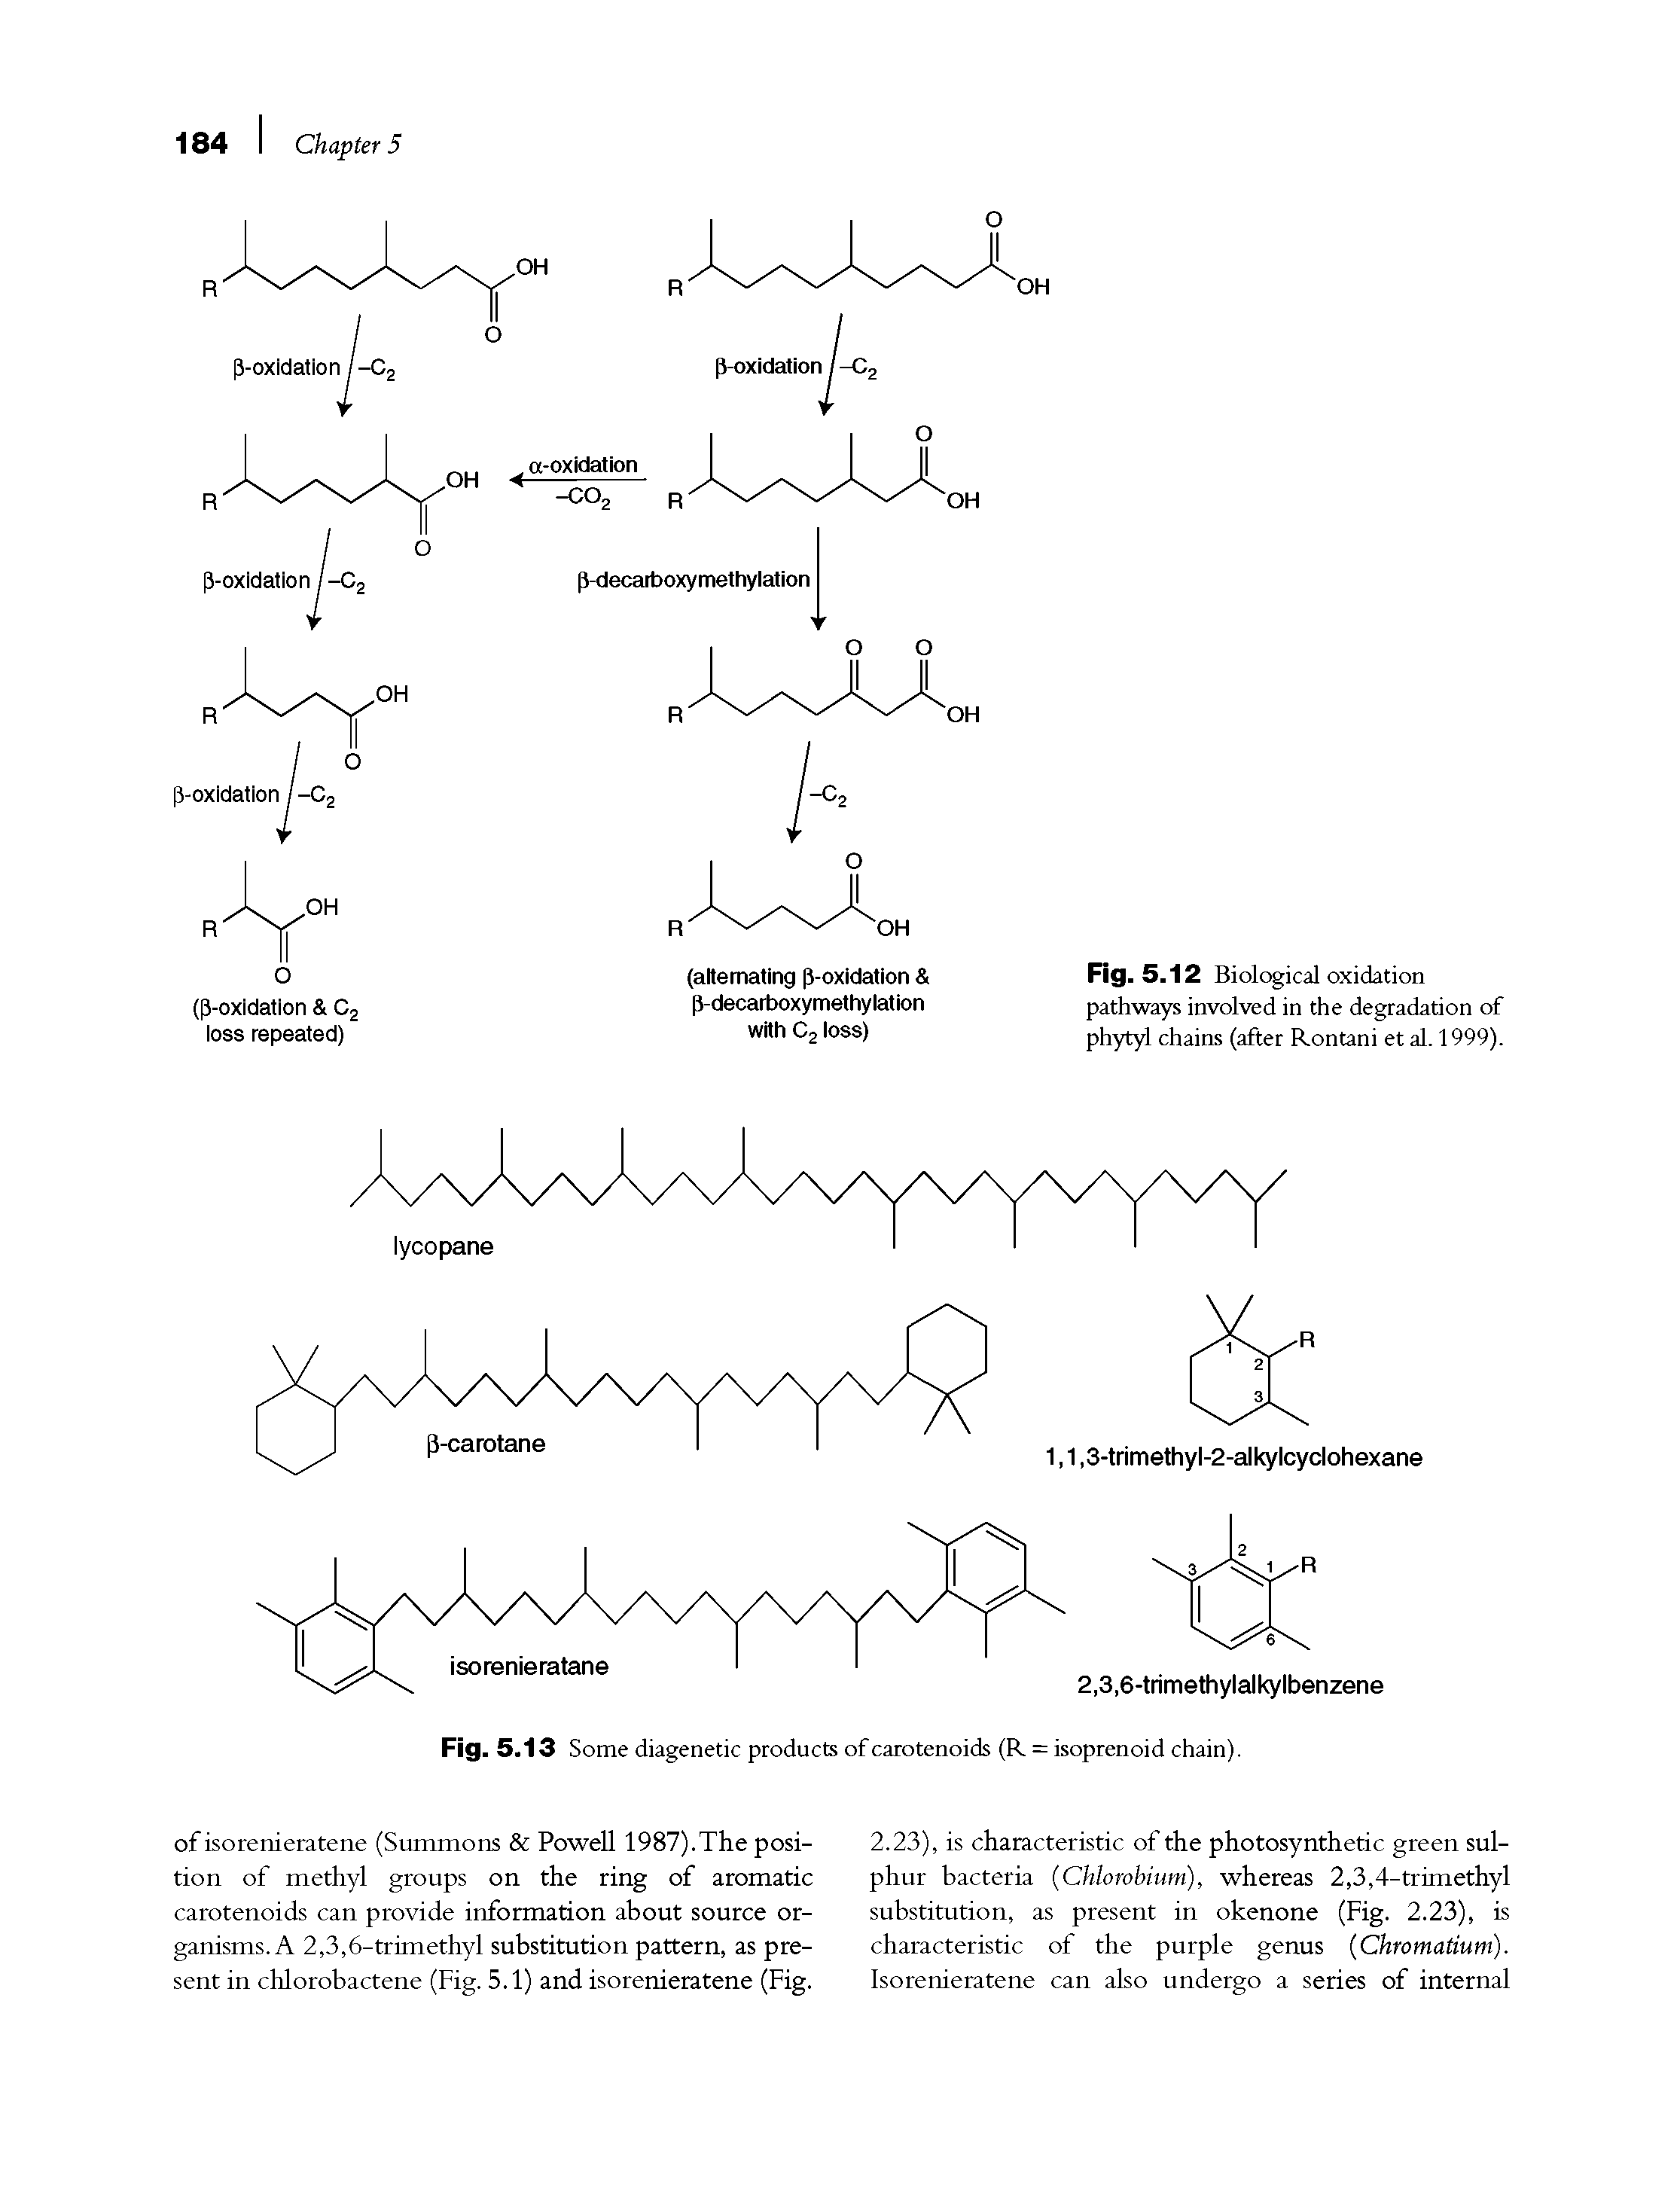 Fig. 5.13 Some diagenetic products of carotenoids (R = isoprenoid chain).